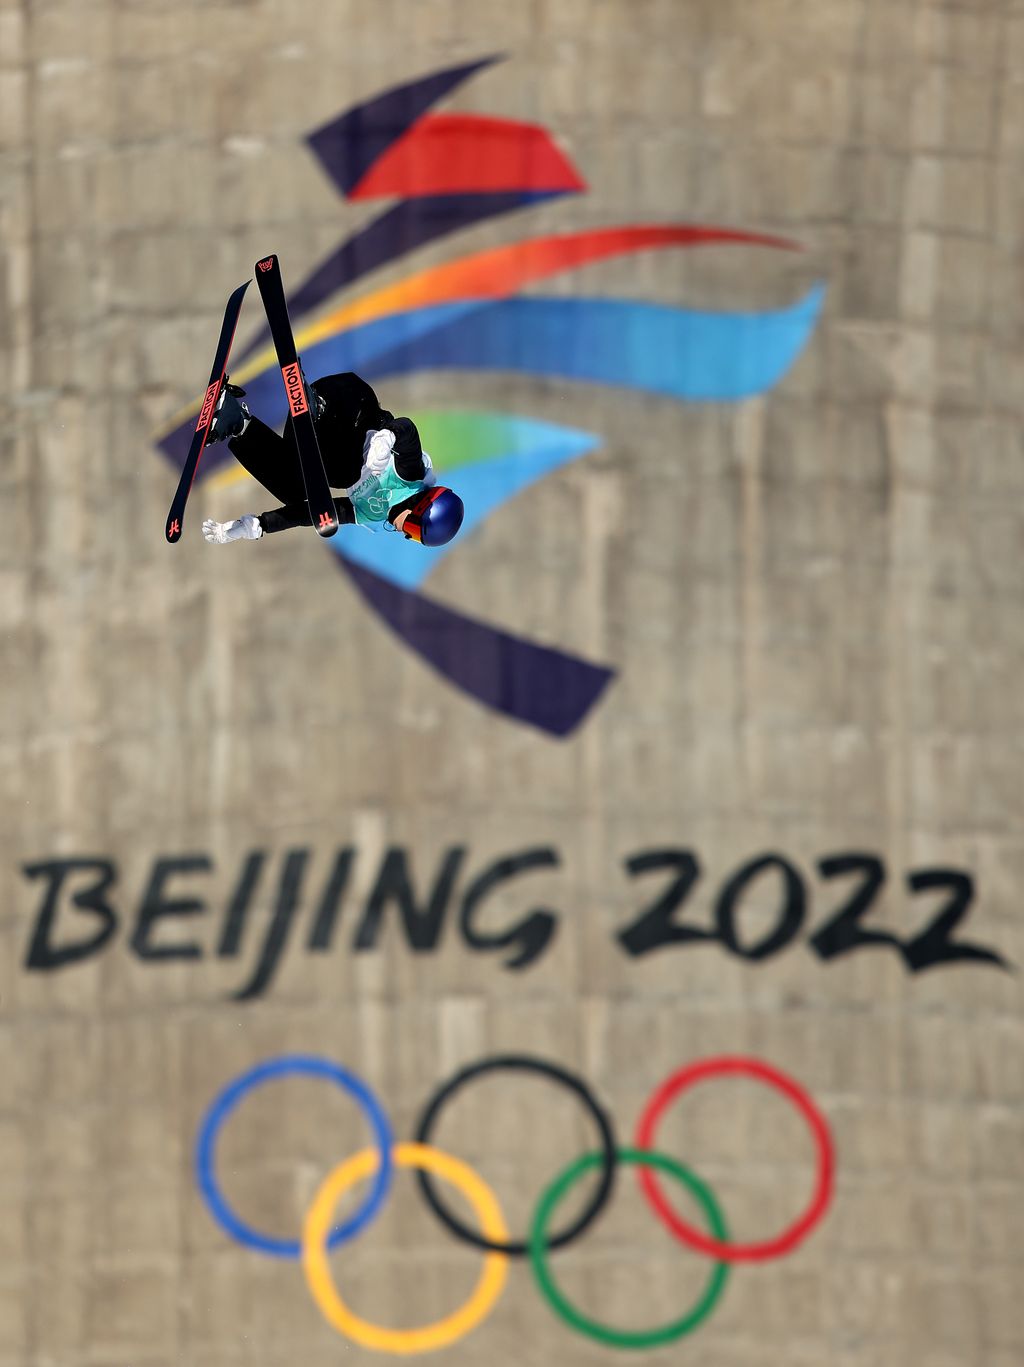 BEIJING, CHINA - FEBRUARY 06: Ailing Eileen Gu of Team China performs a trick during the Freestyle Skiing Big Air training session on Day 2 of the Beijing 2022 Winter Olympic Games at Big Air Shougang on February 06, 2022 in Beijing, China. (Photo by Richard Heathcote/Getty Images)